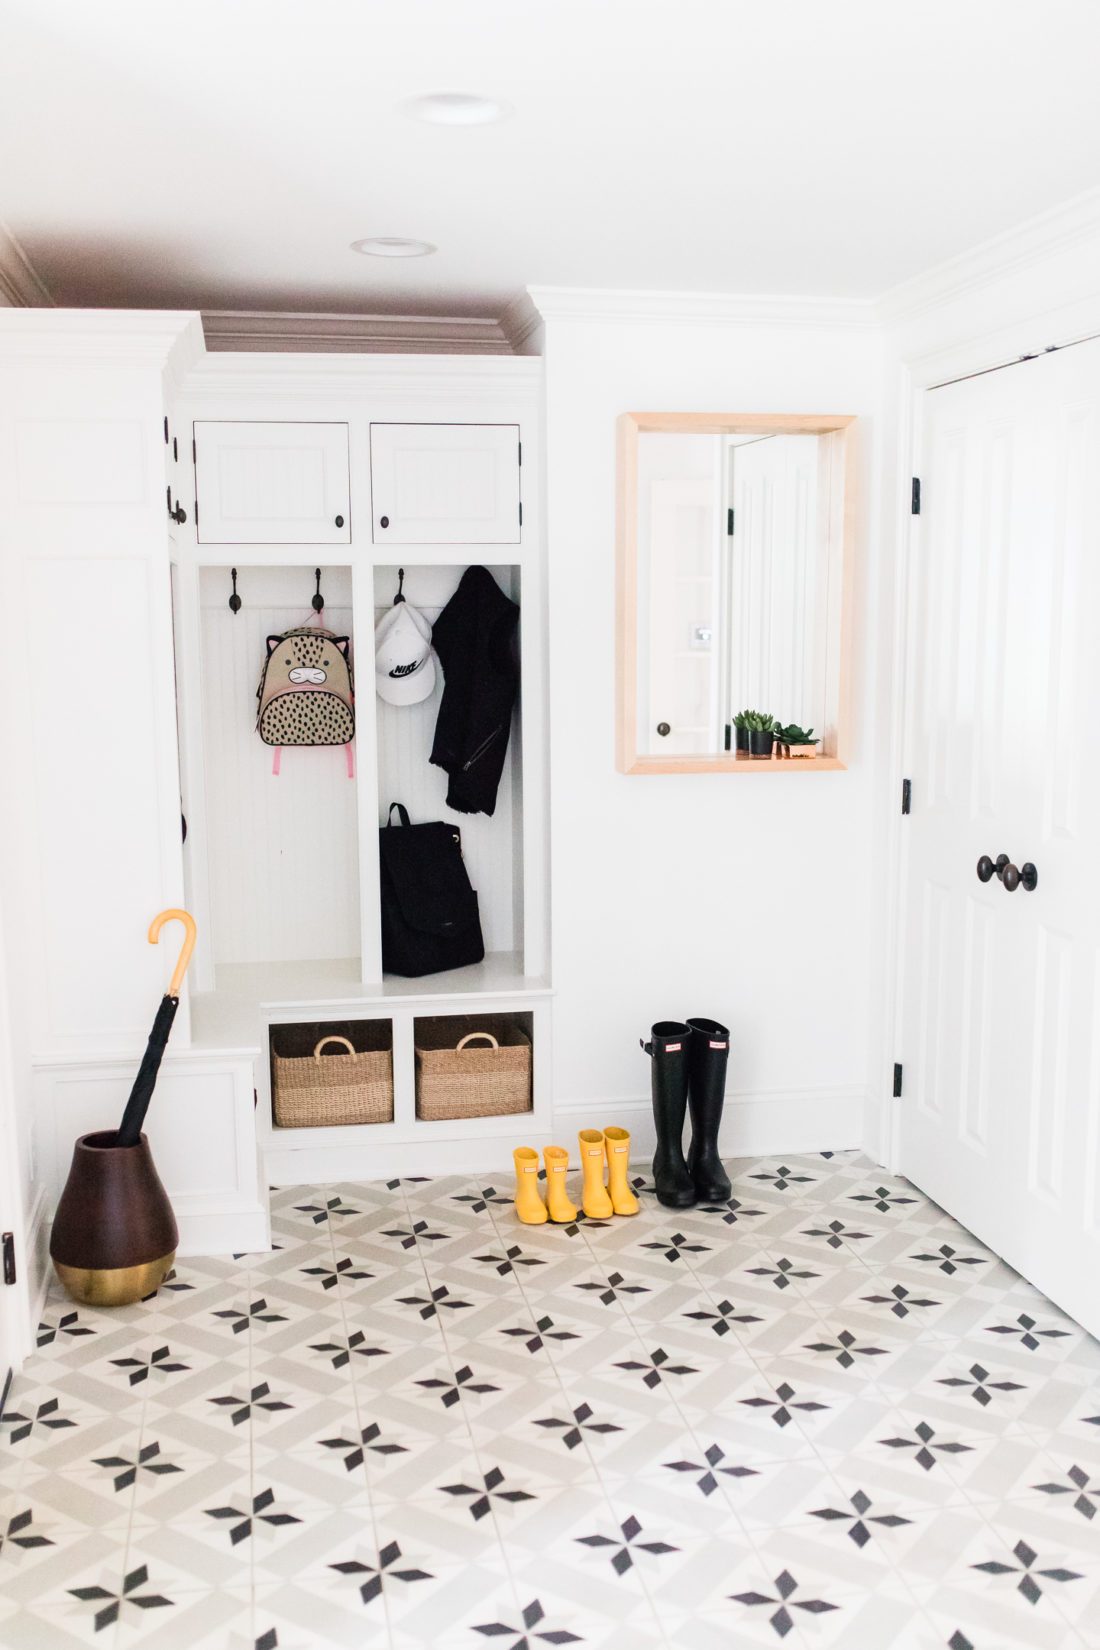 The Black and white mud room in Eva Amurri Martino's Connecticut home featuring black and white patterned cement tile